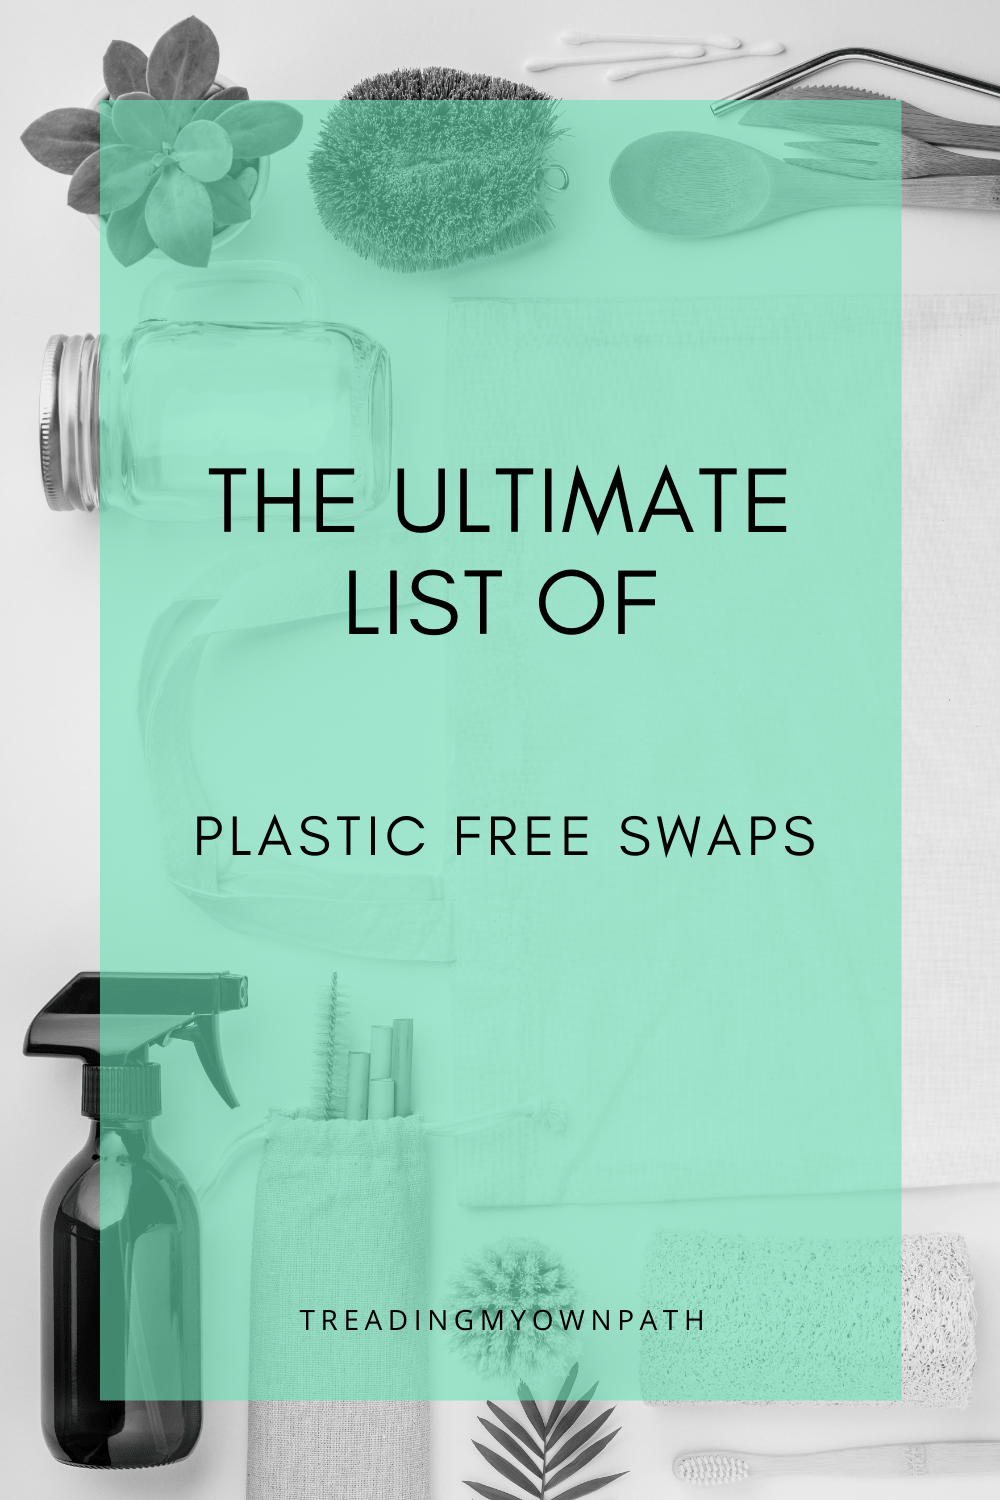 The ultimate list of plastic free swaps